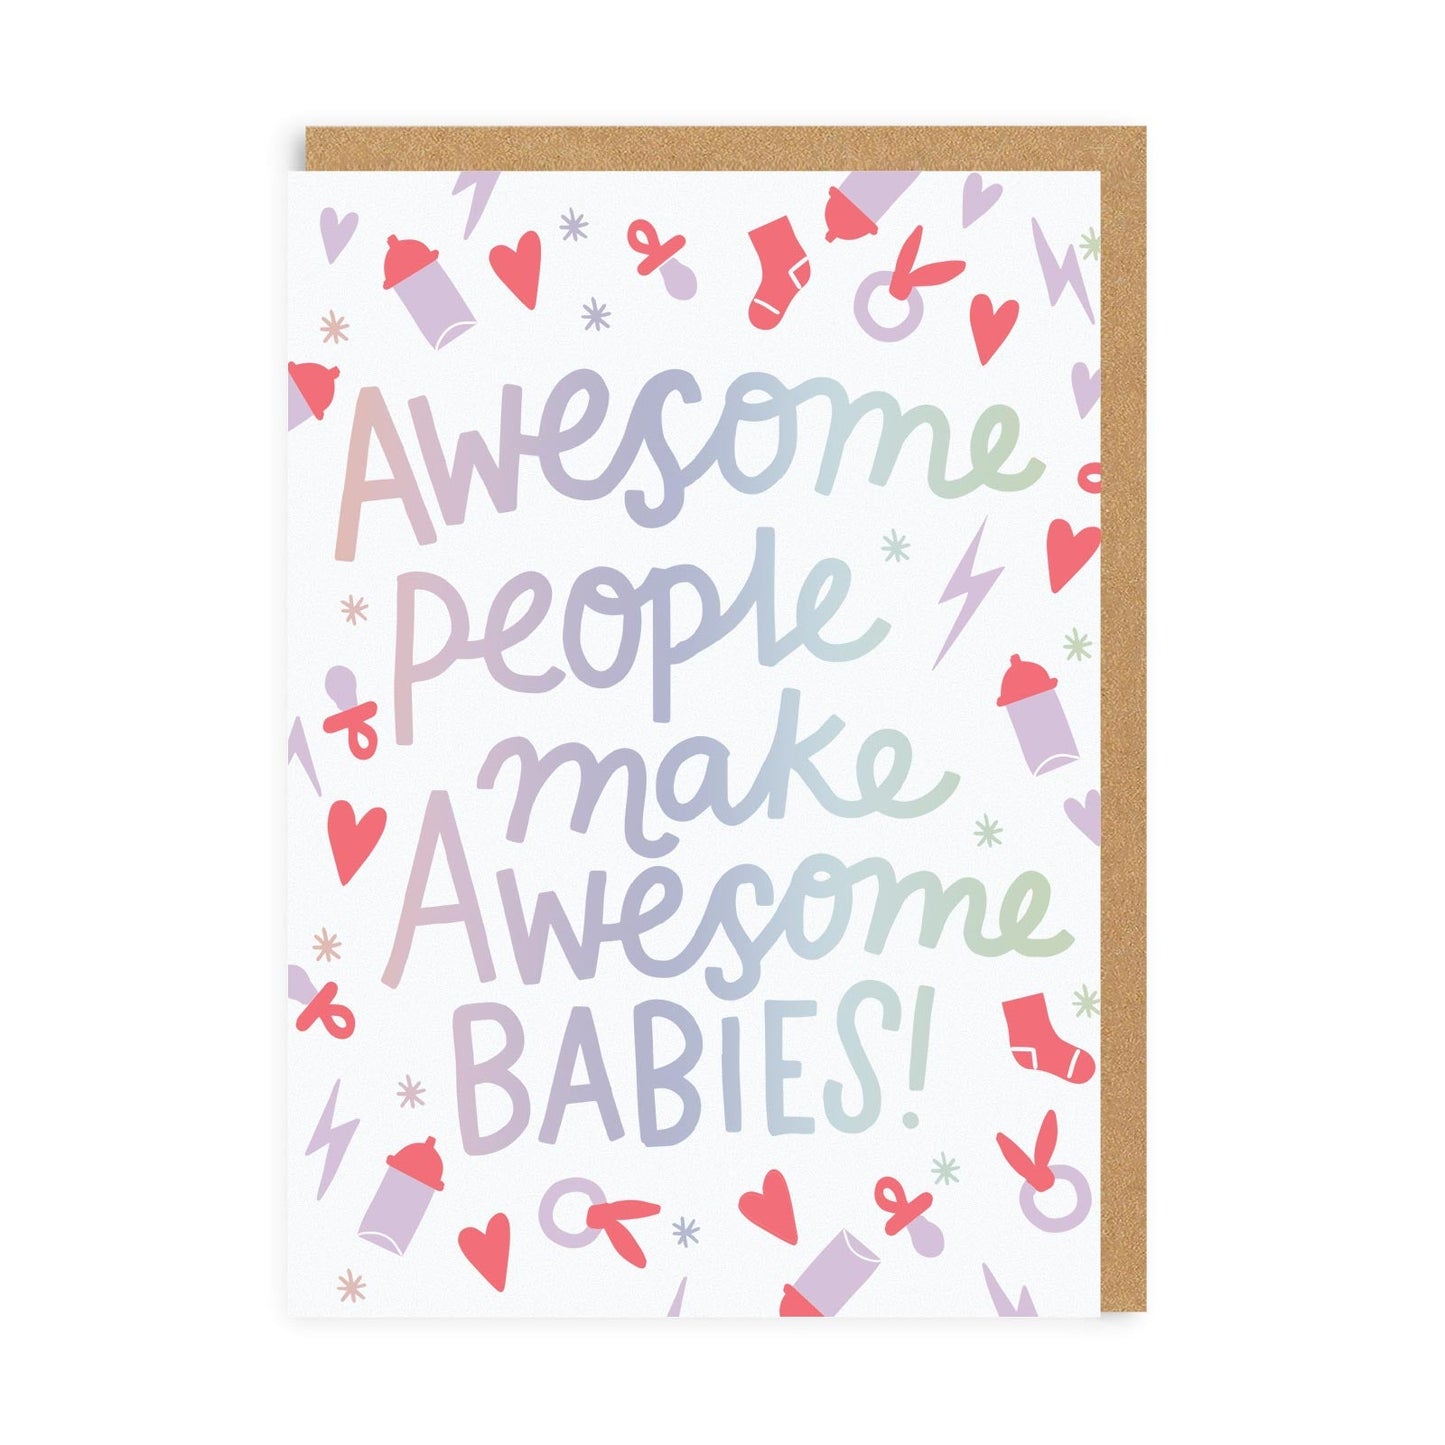 Awesome People Make Awesome Babies Greeting Card, A6